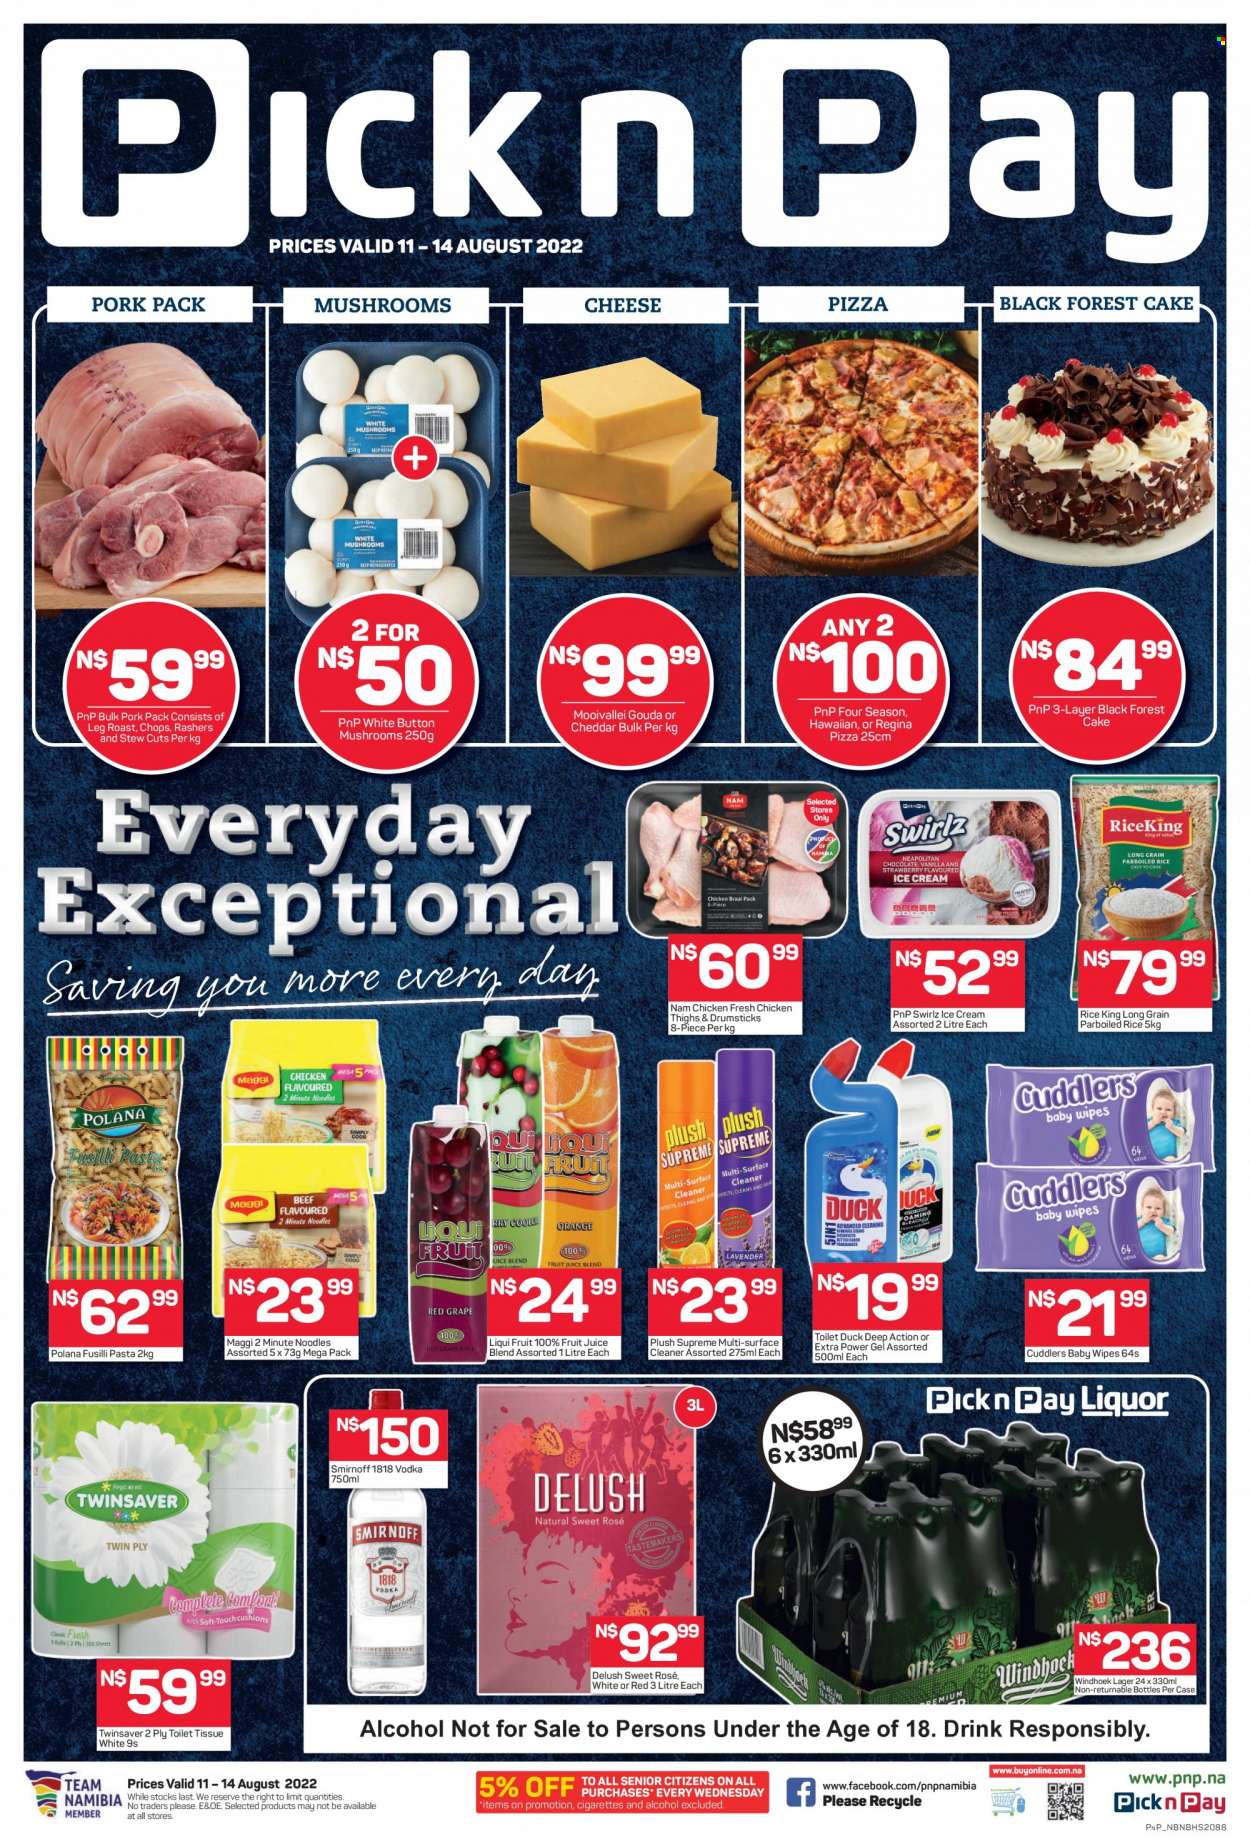 Pick n Pay catalogue  - 11/08/2022 - 14/08/2022 - Sales products - cake, pizza, pasta, noodles, rashers, gouda, ice cream, Maggi, rice, parboiled rice, fruit juice, juice, wine, alcohol, rosé wine, Smirnoff, vodka, beer, Lager, chicken thighs, chicken meat, wipes, baby wipes, surface cleaner, cleaner. Page 1.